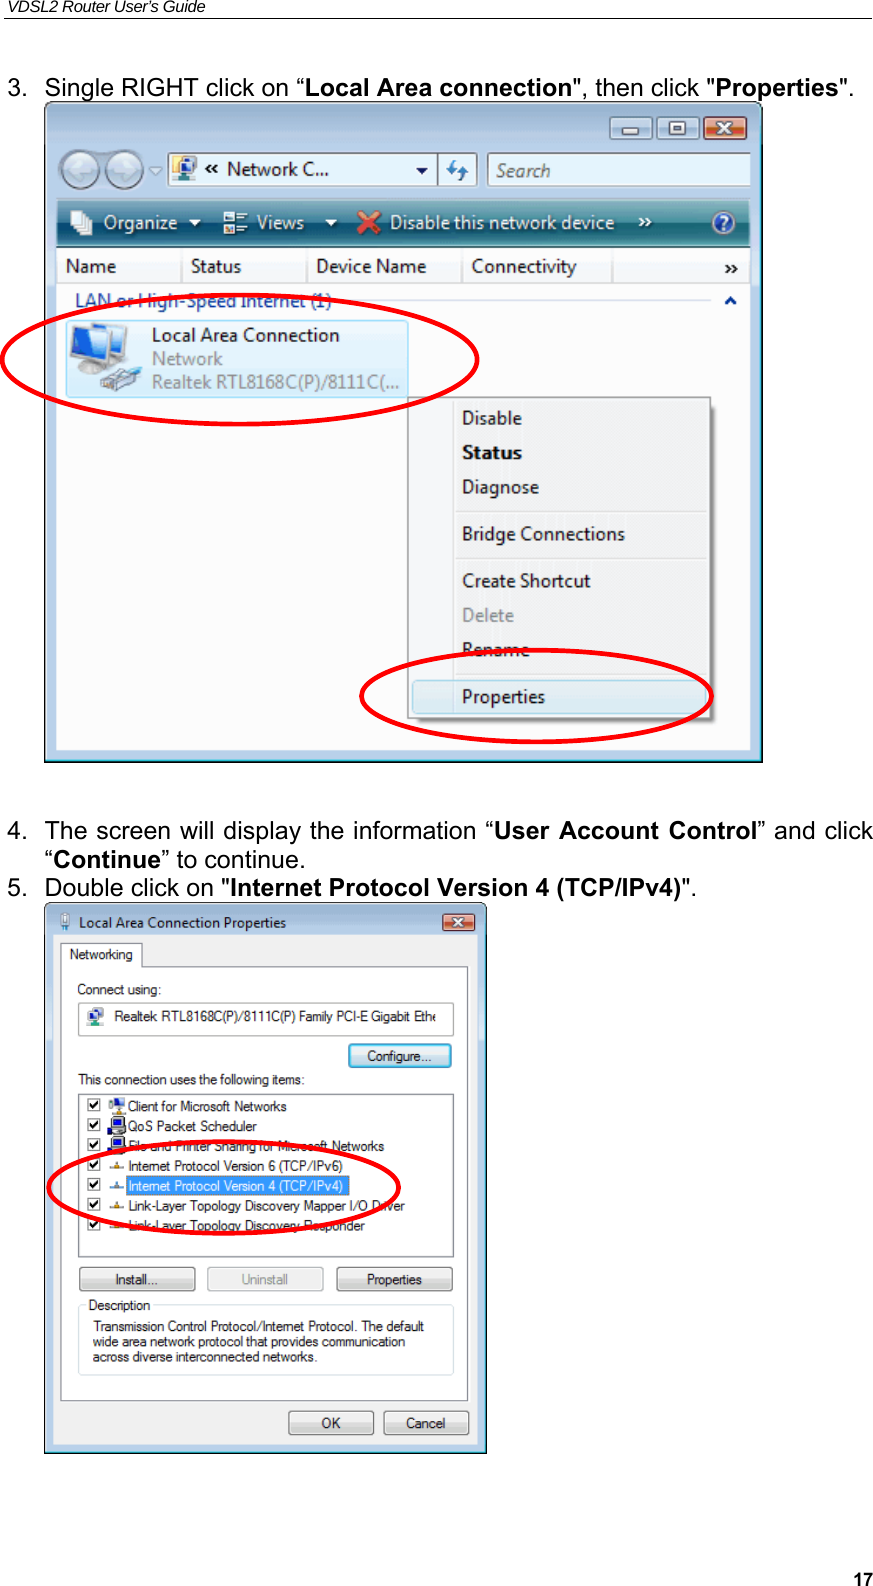 VDSL2 Router User’s Guide     173.  Single RIGHT click on “Local Area connection&quot;, then click &quot;Properties&quot;.   4.  The screen will display the information “User  Account Control” and click    “Continue” to continue. 5.  Double click on &quot;Internet Protocol Version 4 (TCP/IPv4)&quot;.   